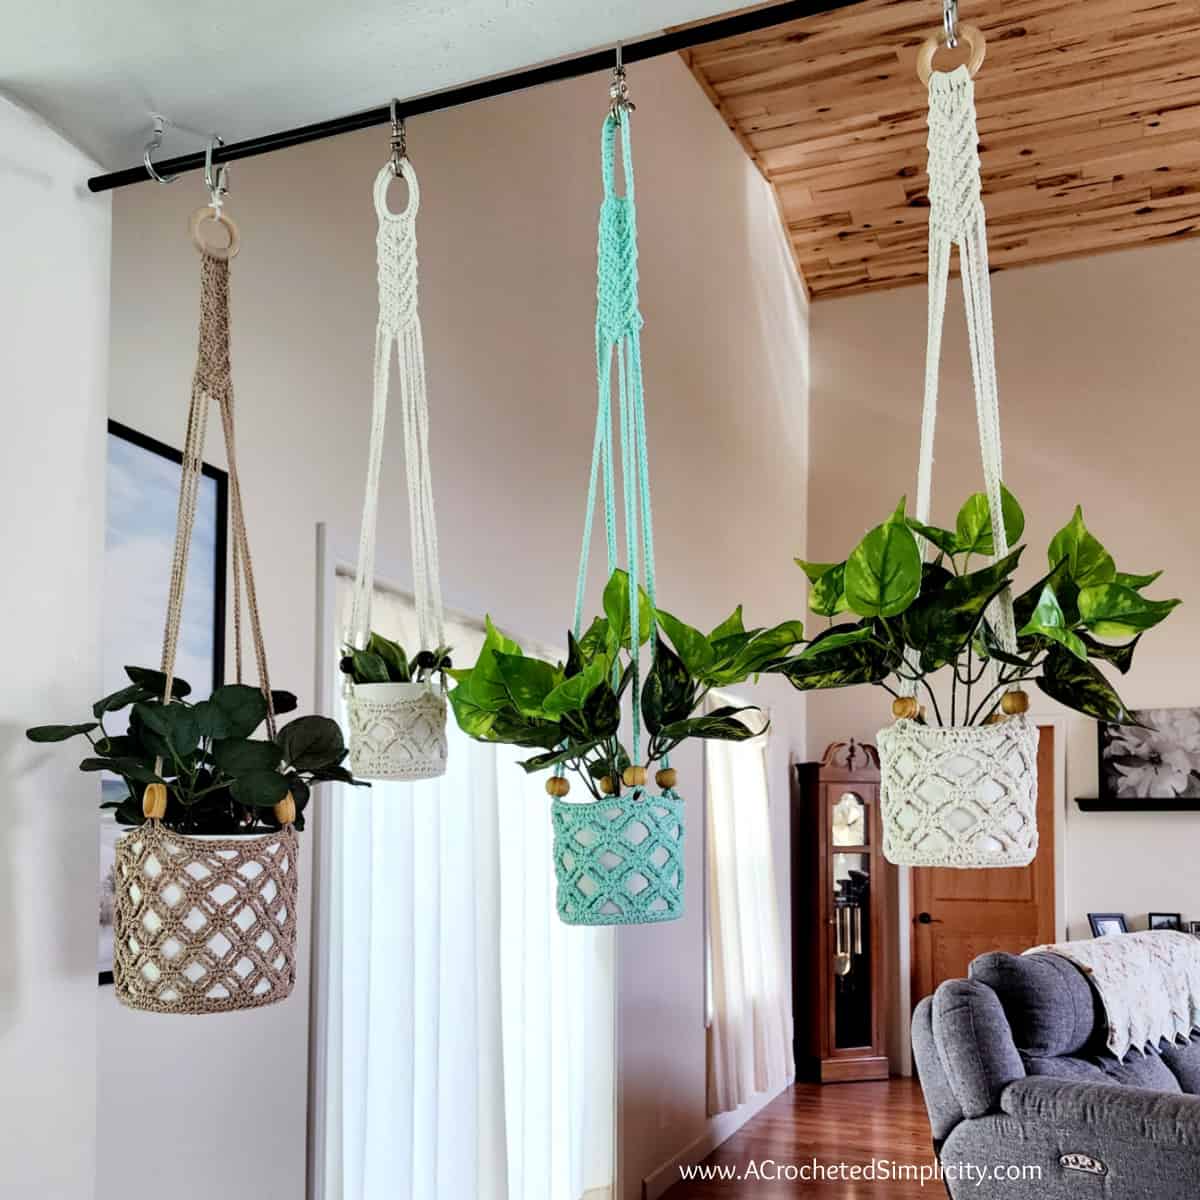 Crochet Kit for Beginners: 4 PCS Hanging Potted Plants, Easy